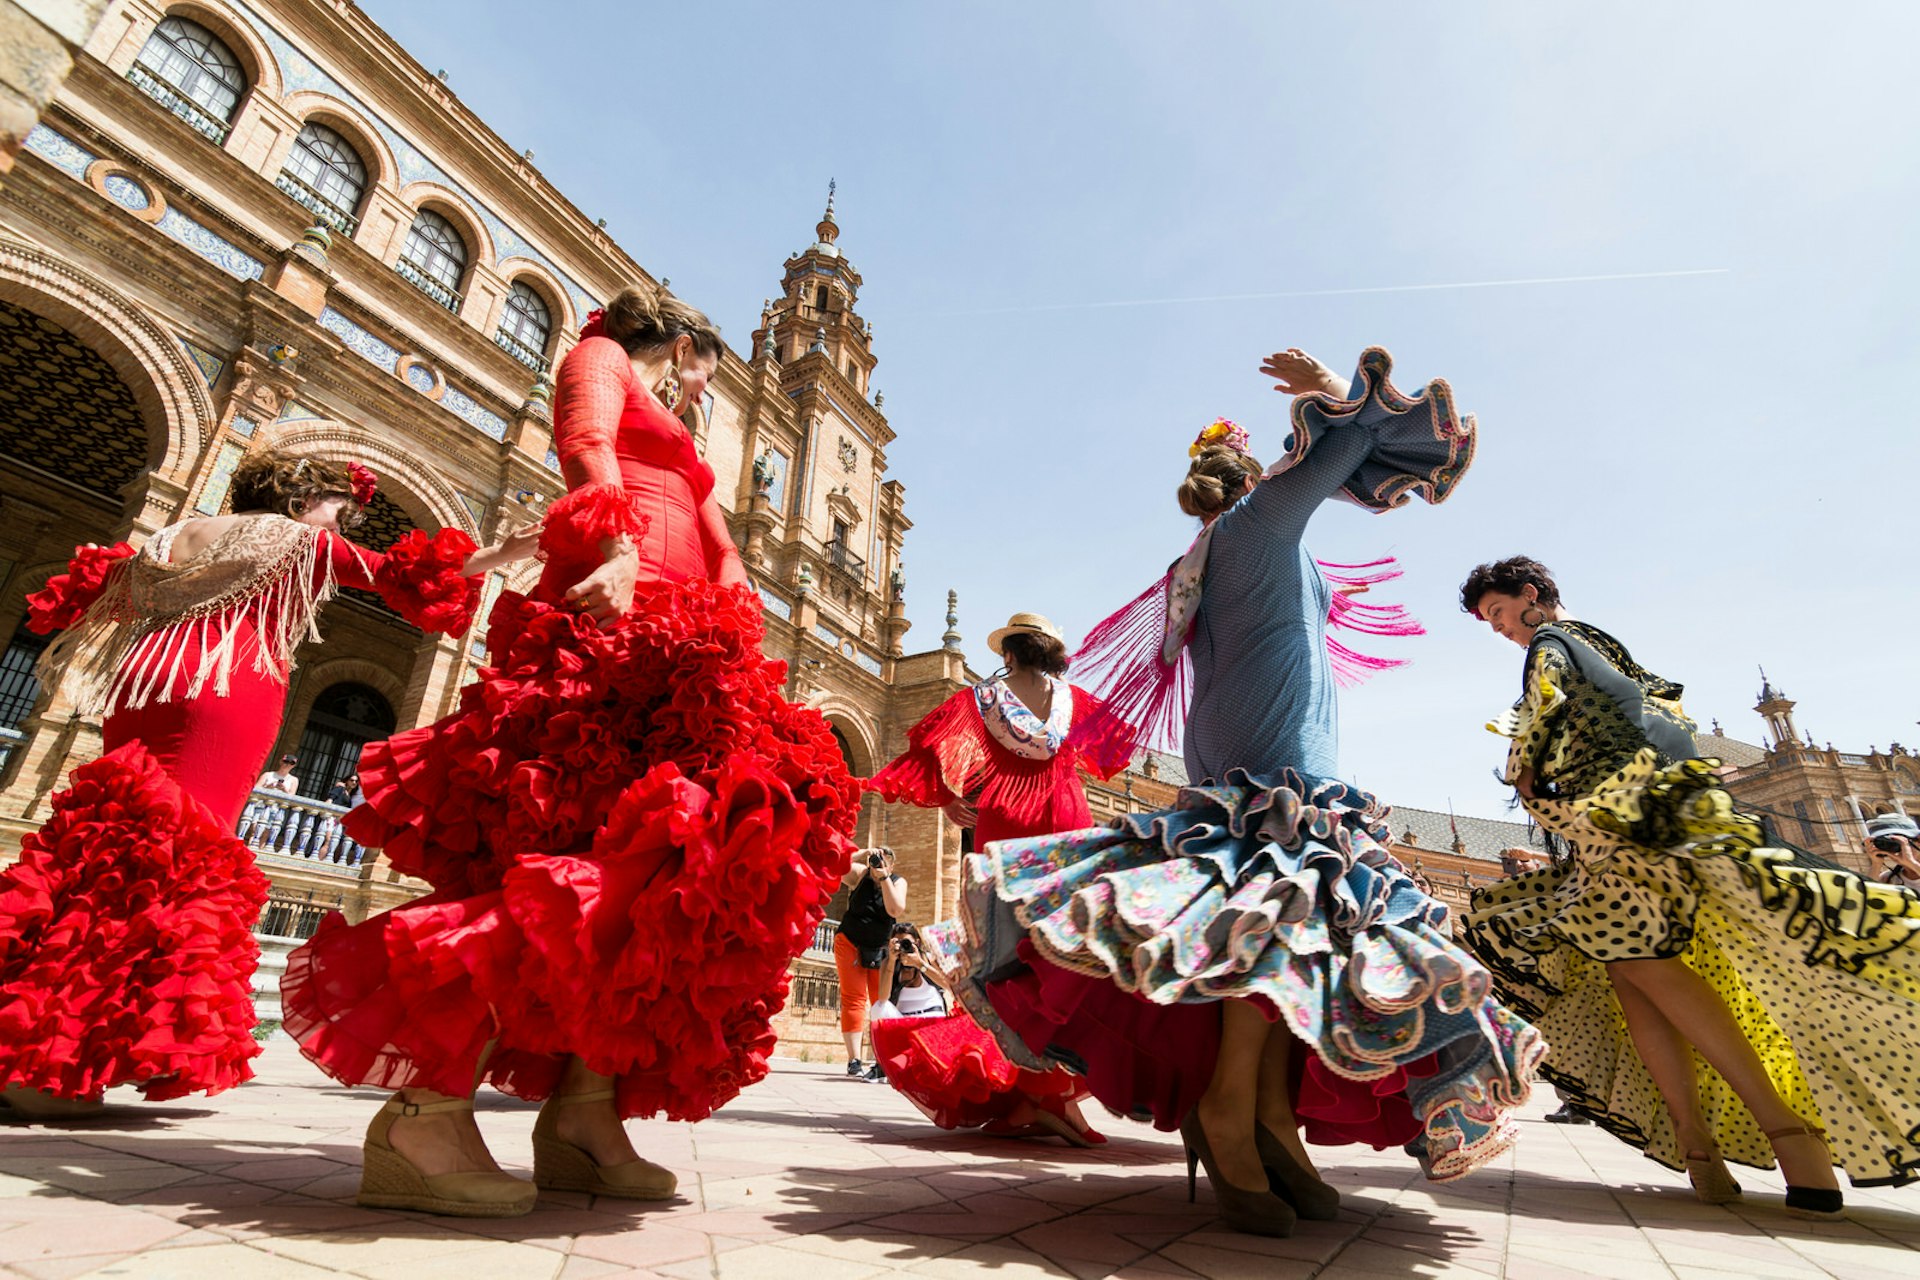 Young women dressed in traditional outfits dance flamenco on Plaza de Espana, Seville, Spain © leonov.o / Shutterstock